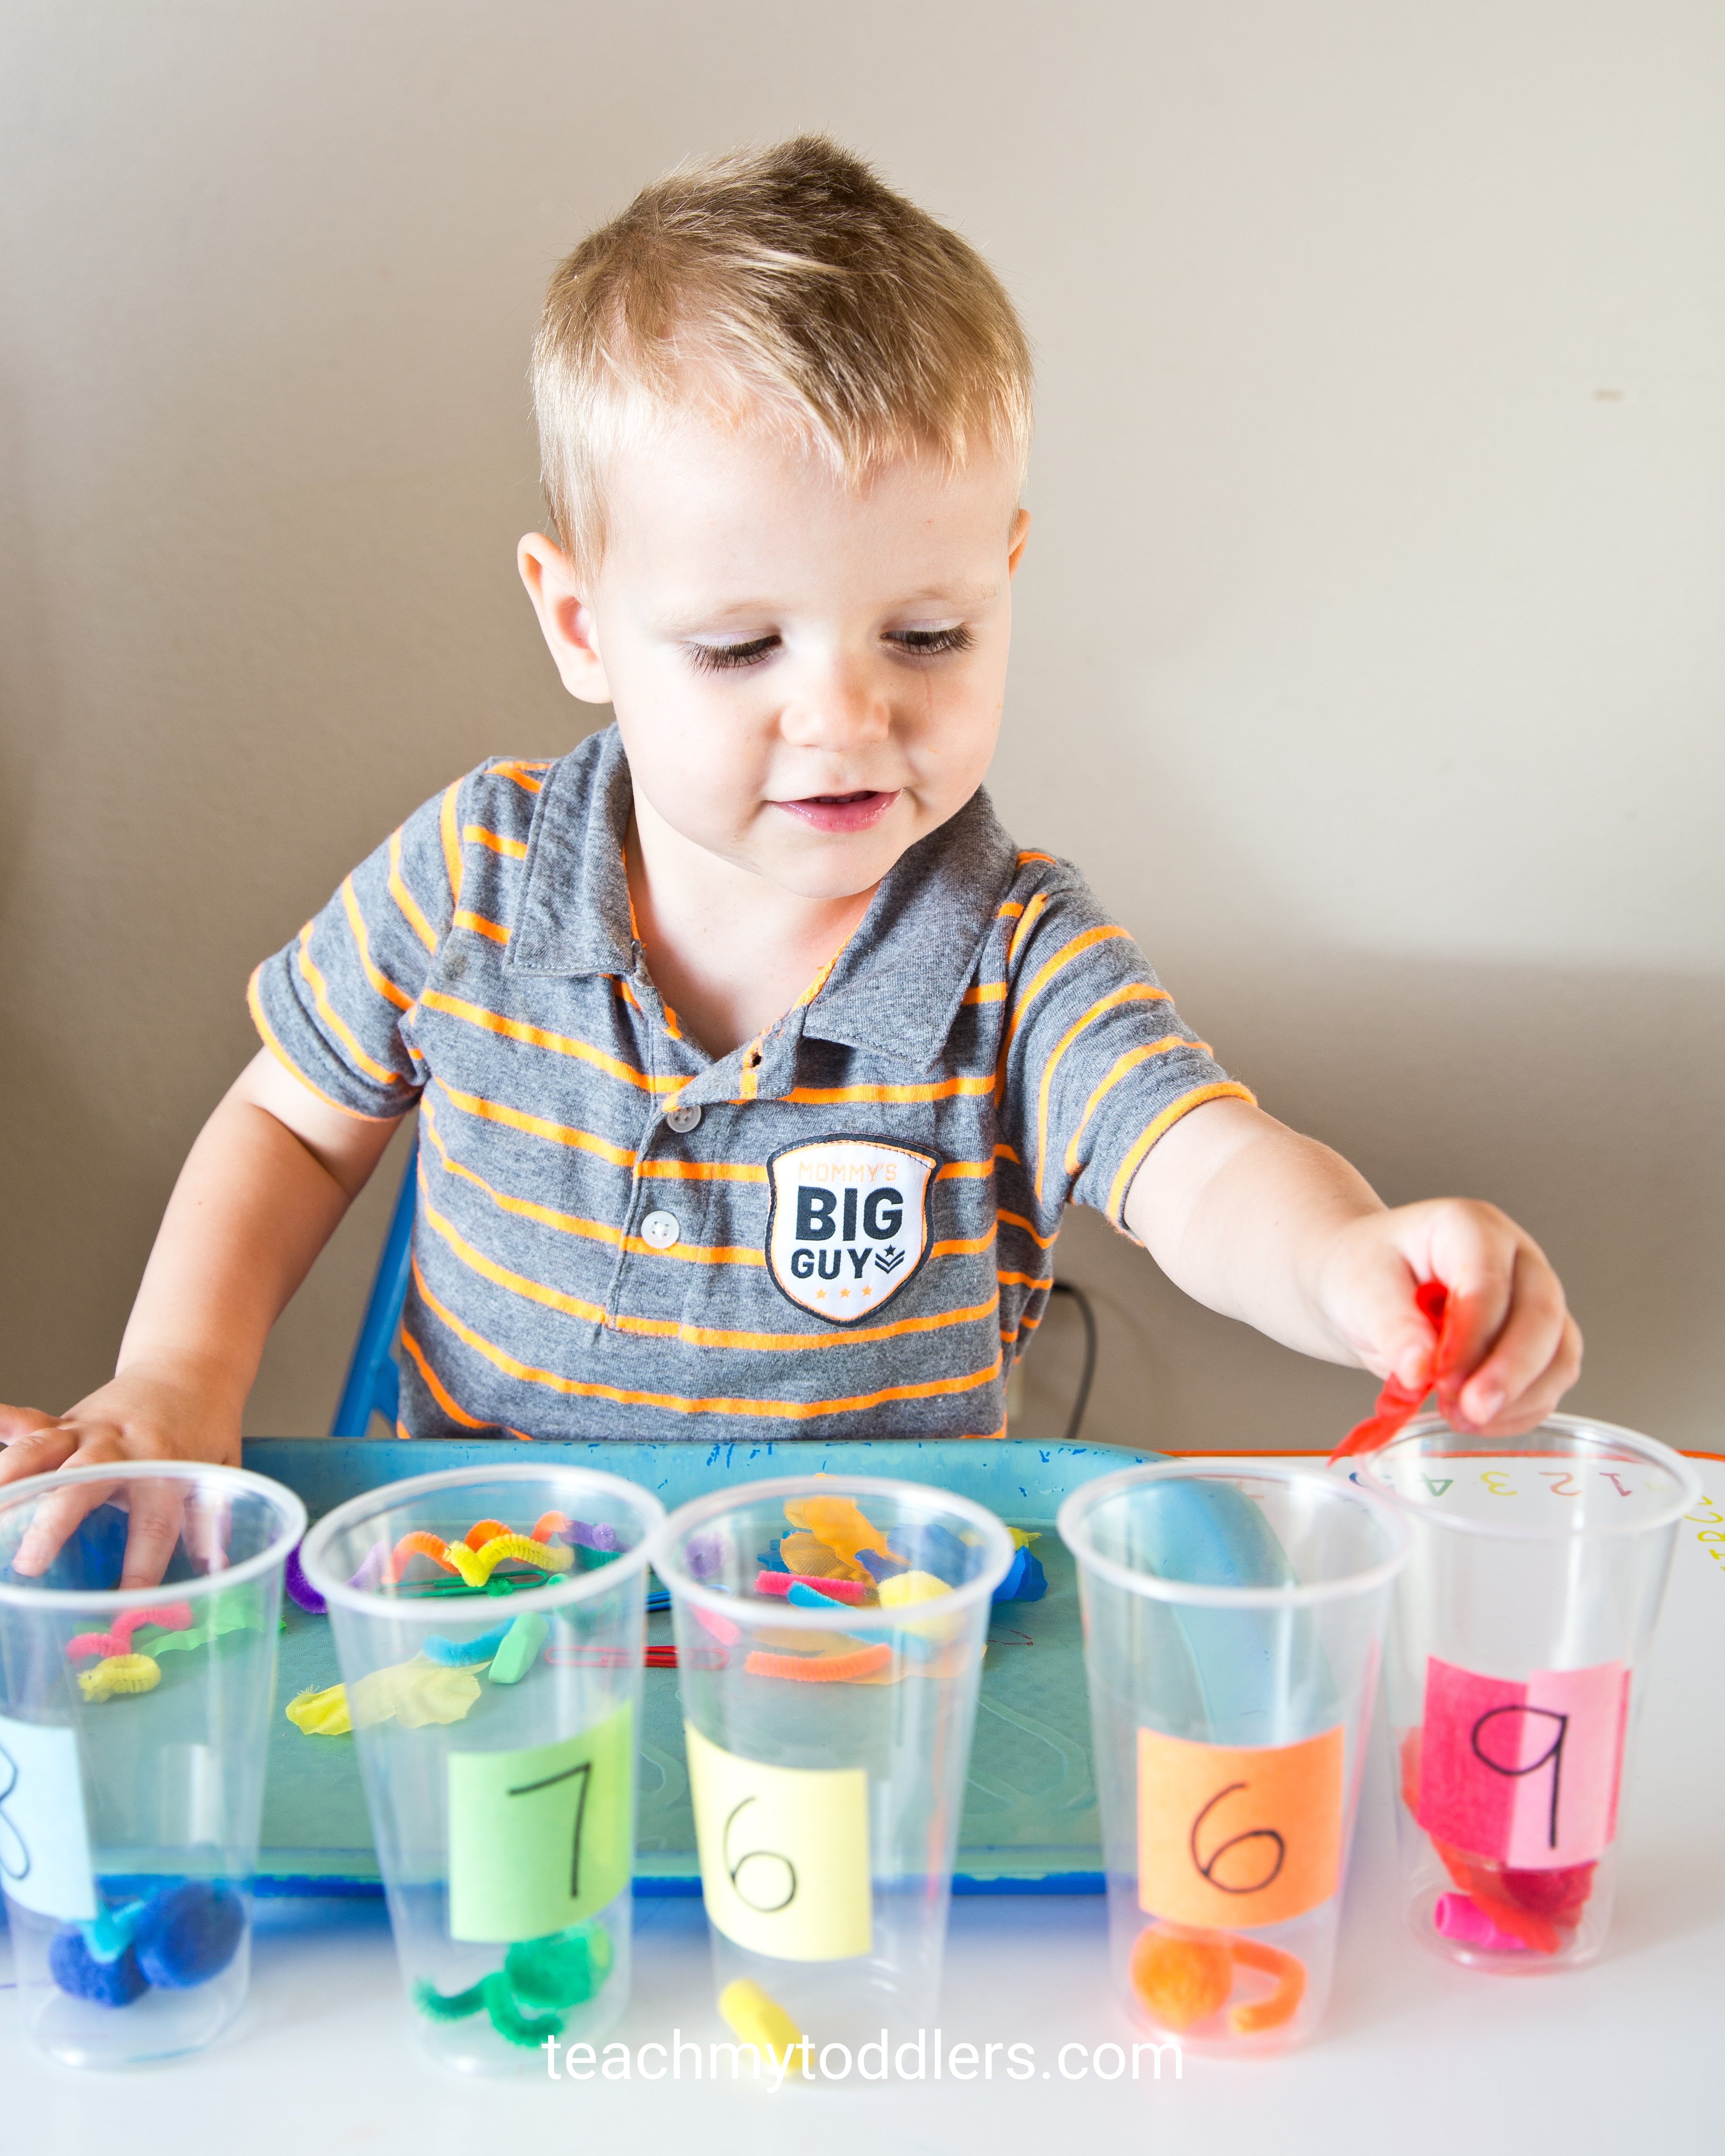 Find out how to use these counting activities to teach your toddlers numbers